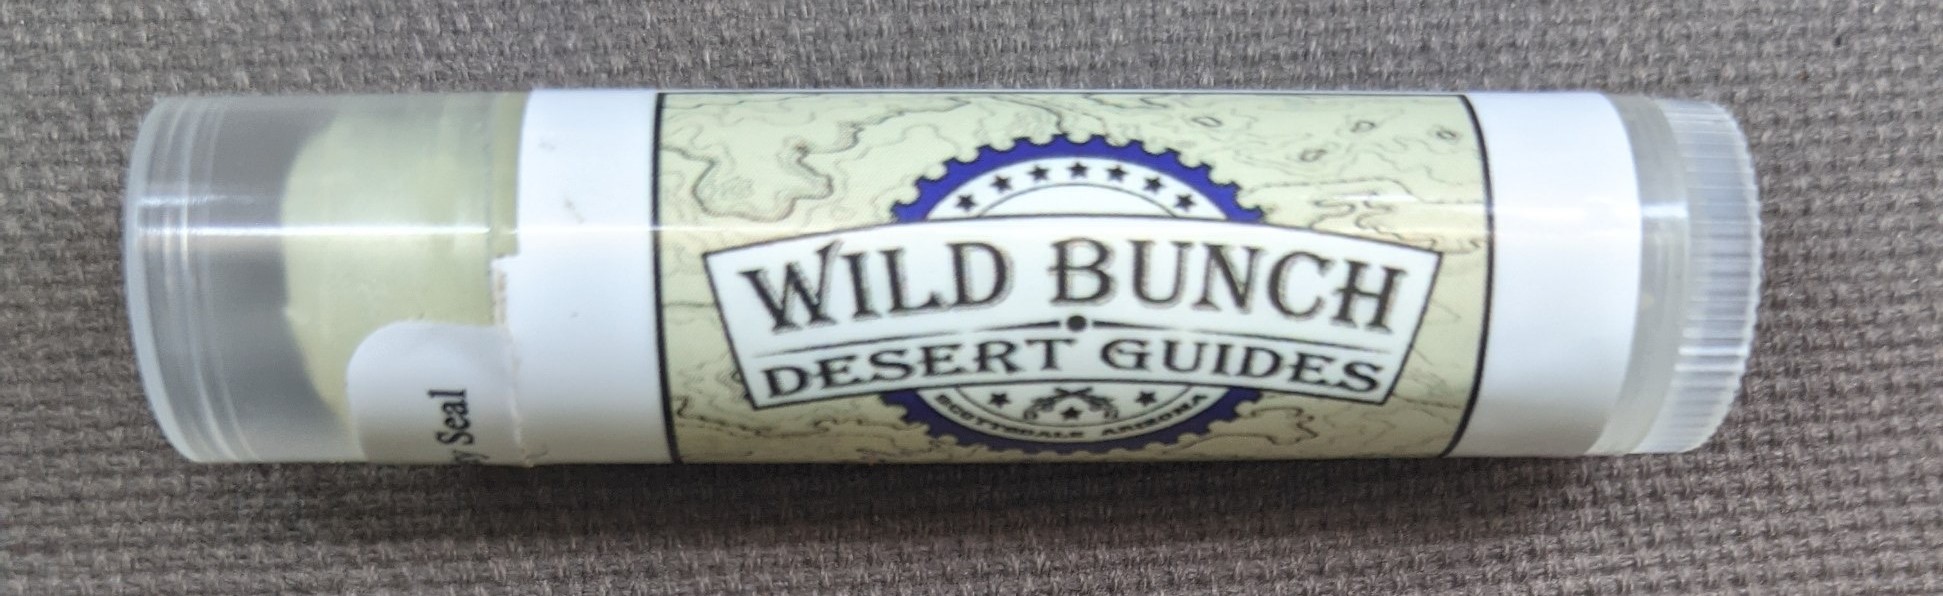 Prickly Pear Cactus Lip Balm from Arizona Sun Products with the Wild Bunch Desert Guides logo.